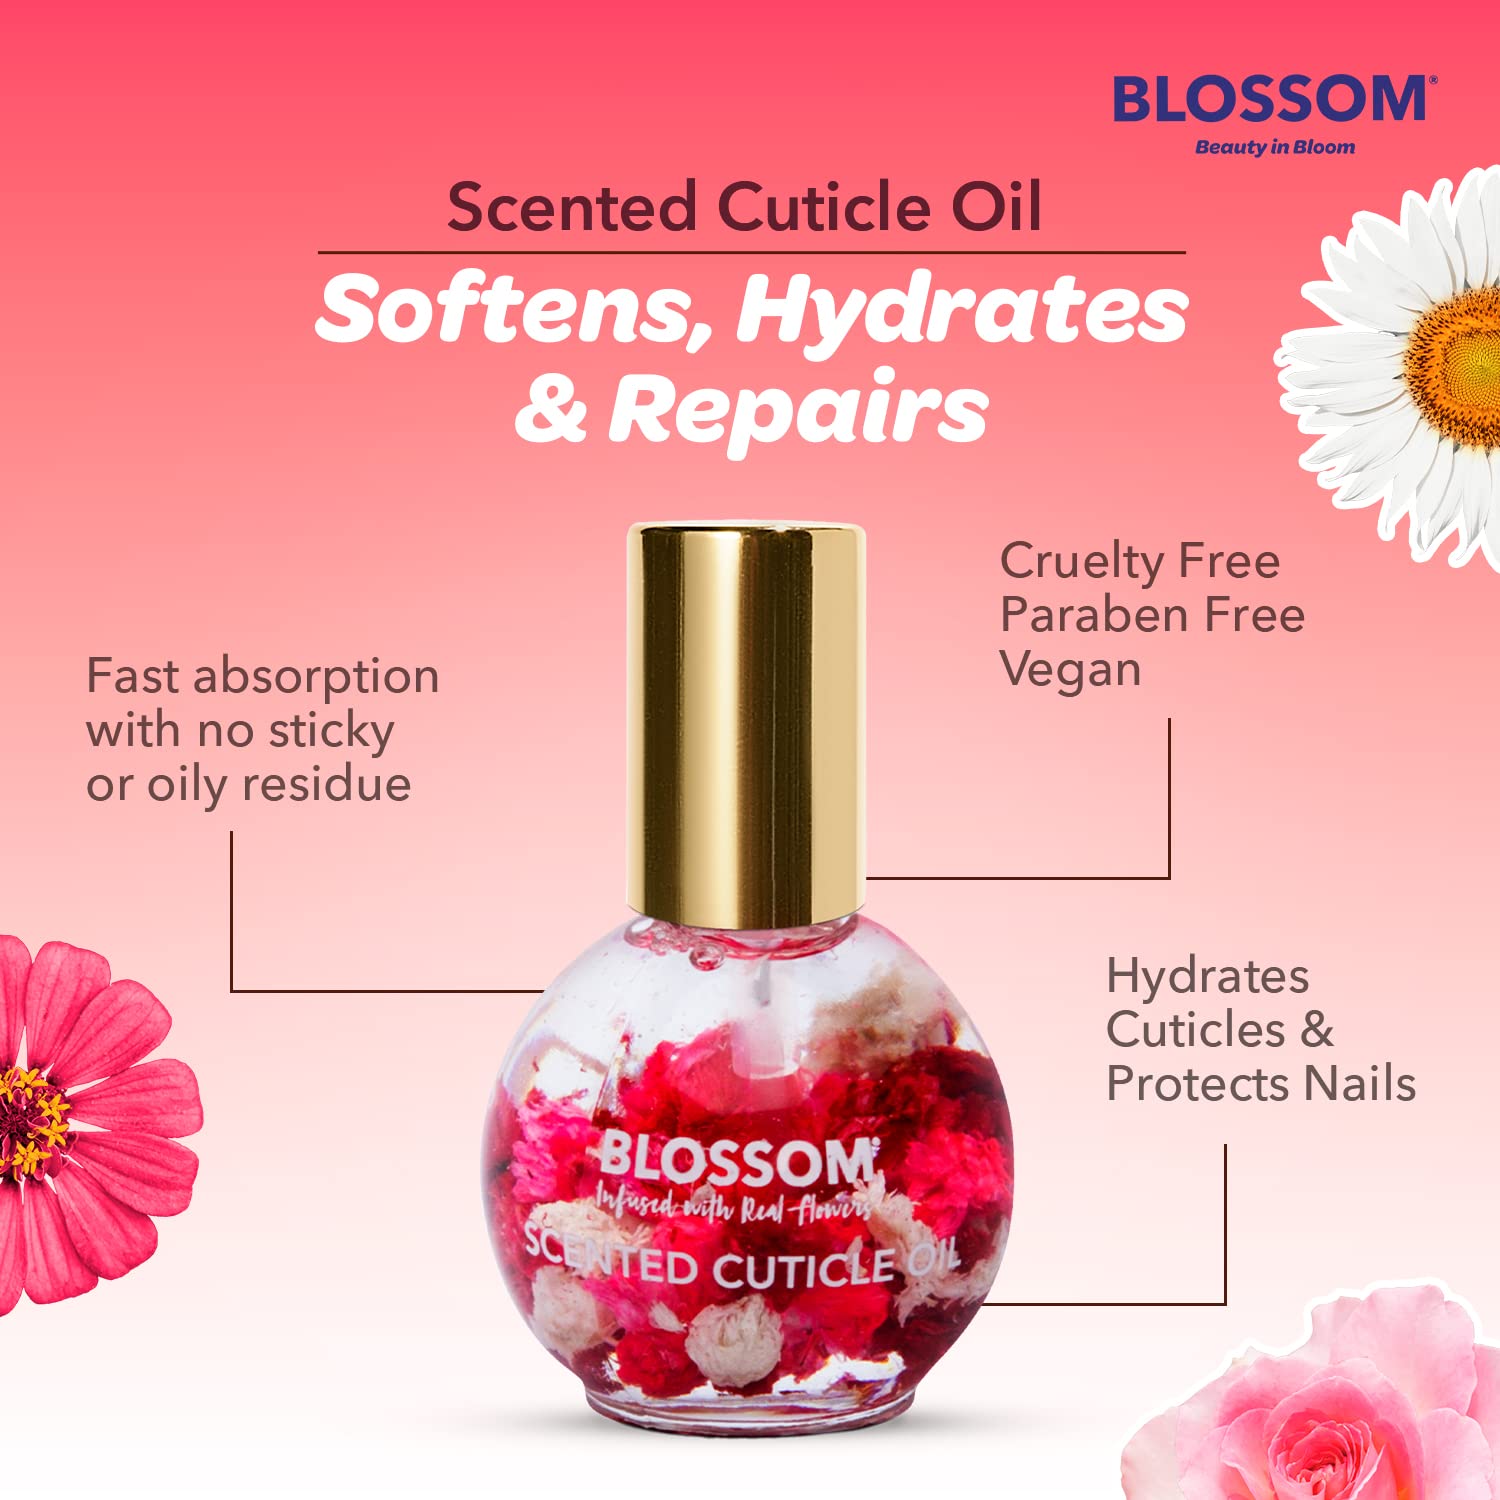 Blossom Hydrating, Scented Cuticle Oil + All Natural Rollerball Perfume Oil, Made in USA, Infused with Real Flowers, 2 Pack Bundle, Rose/Patchouli Rose